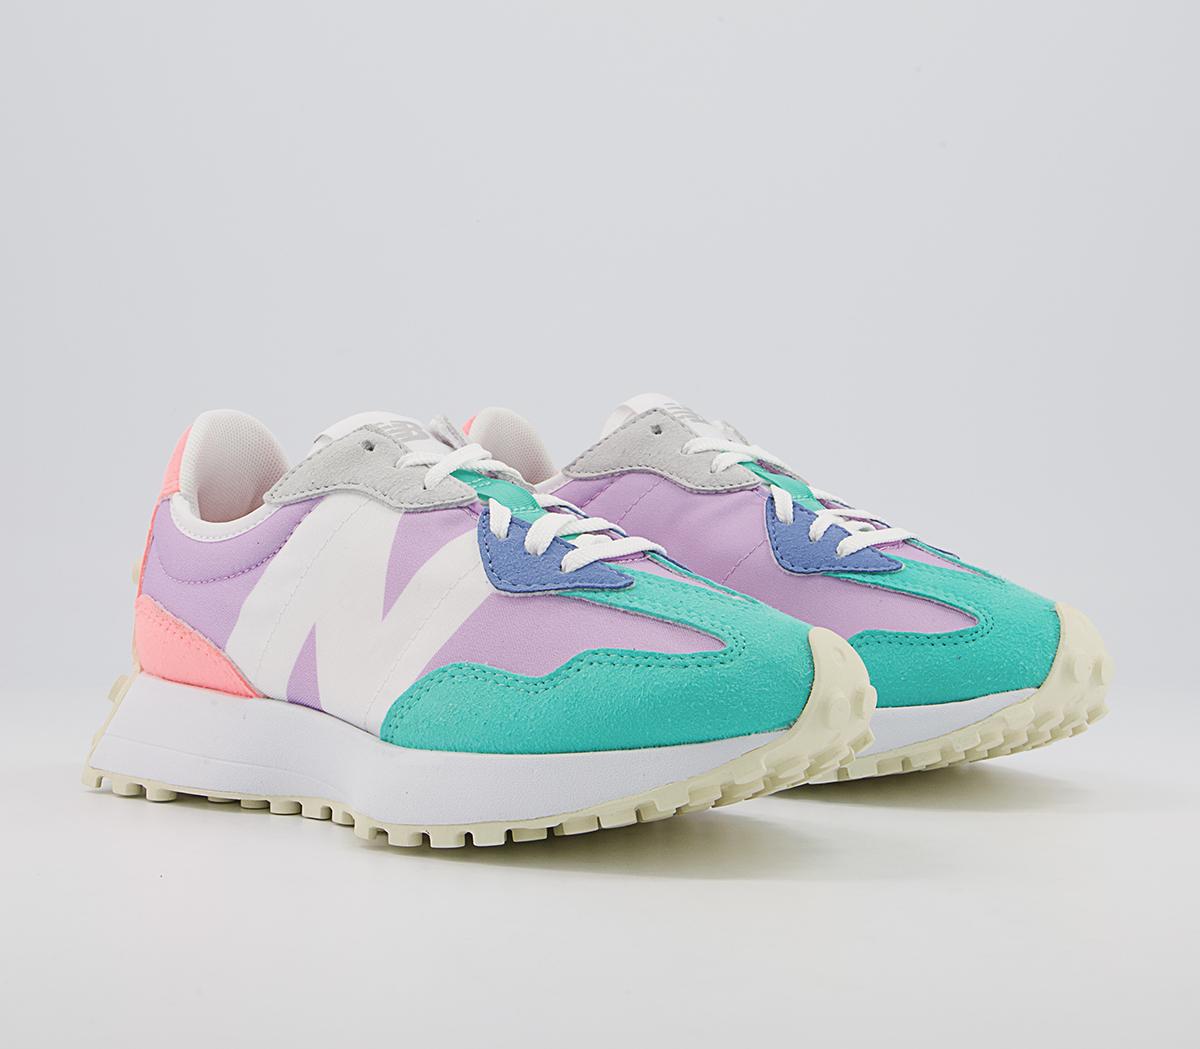 New Balance 327 Trainers Purple Pink Turquoise - Women's Trainers